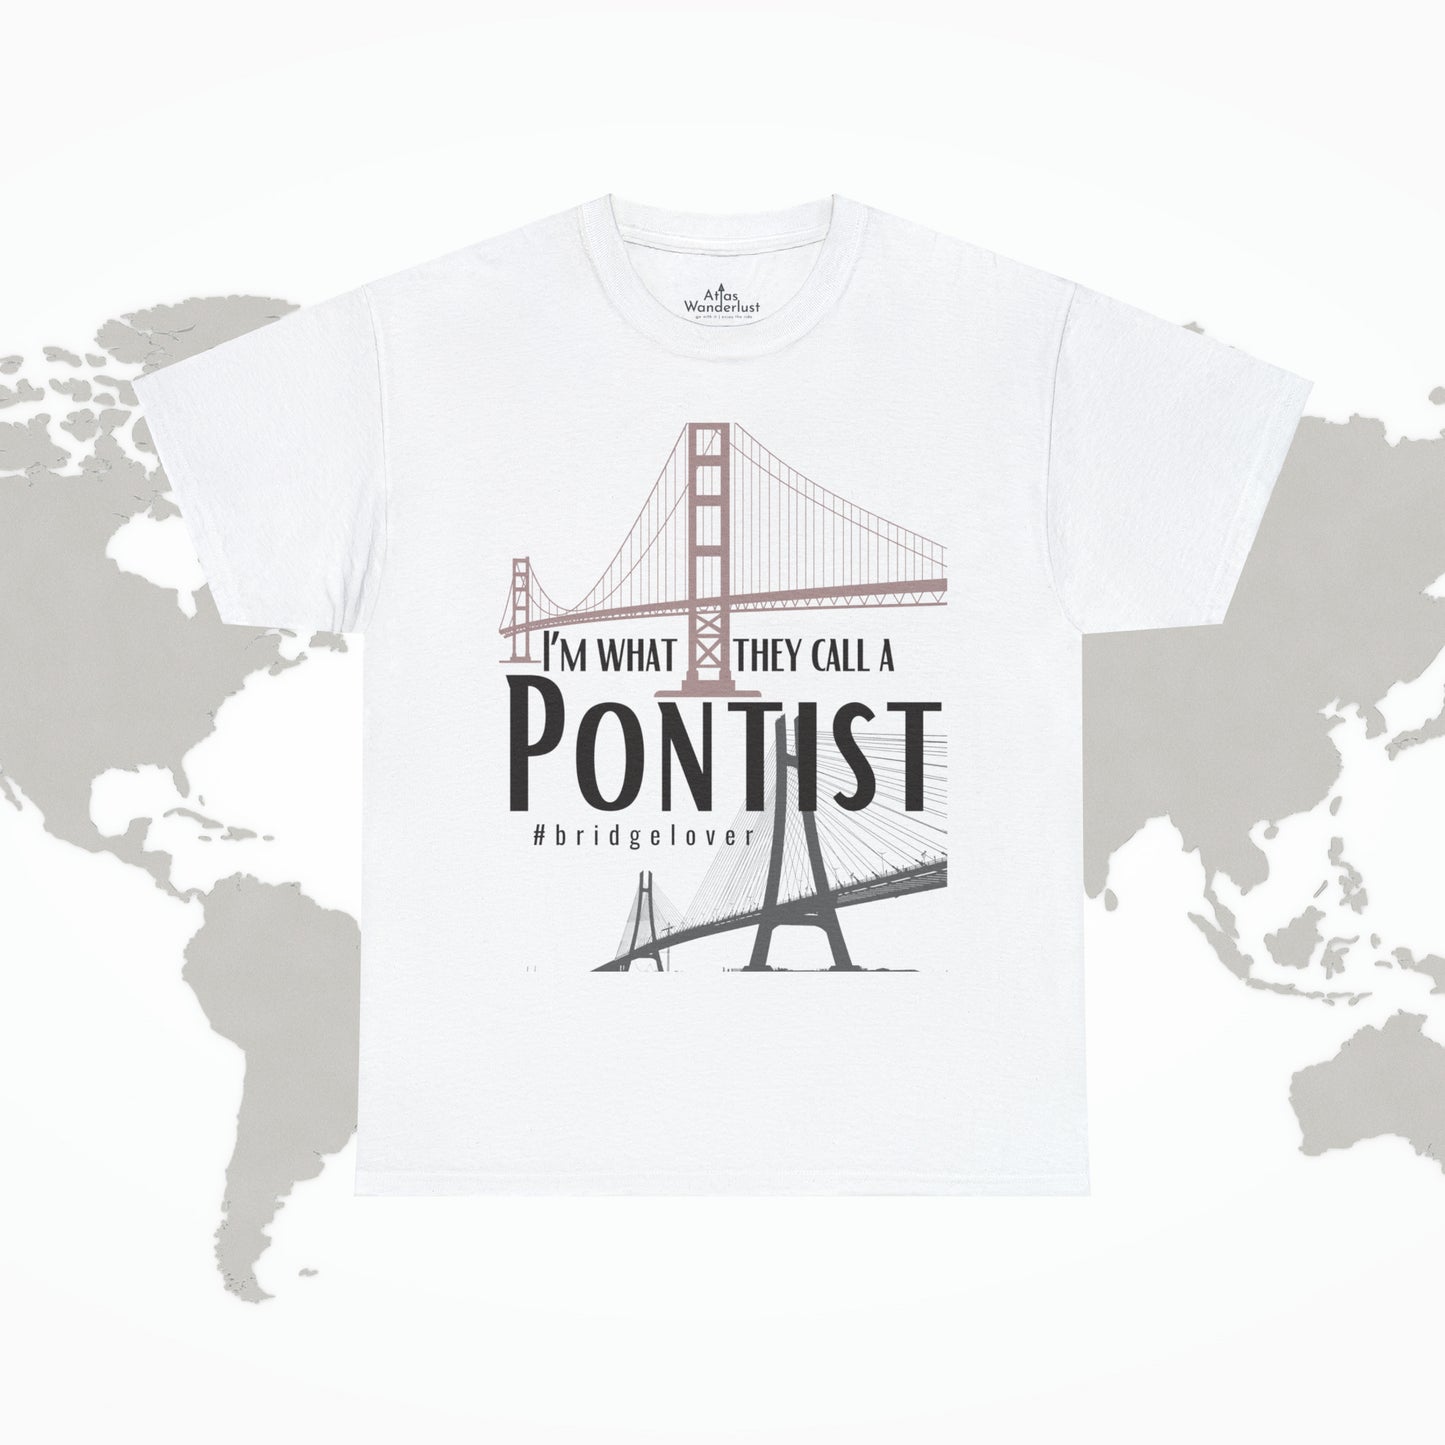 I’m What They Call a Pontist T-Shirt, Bridge Lover's Tee